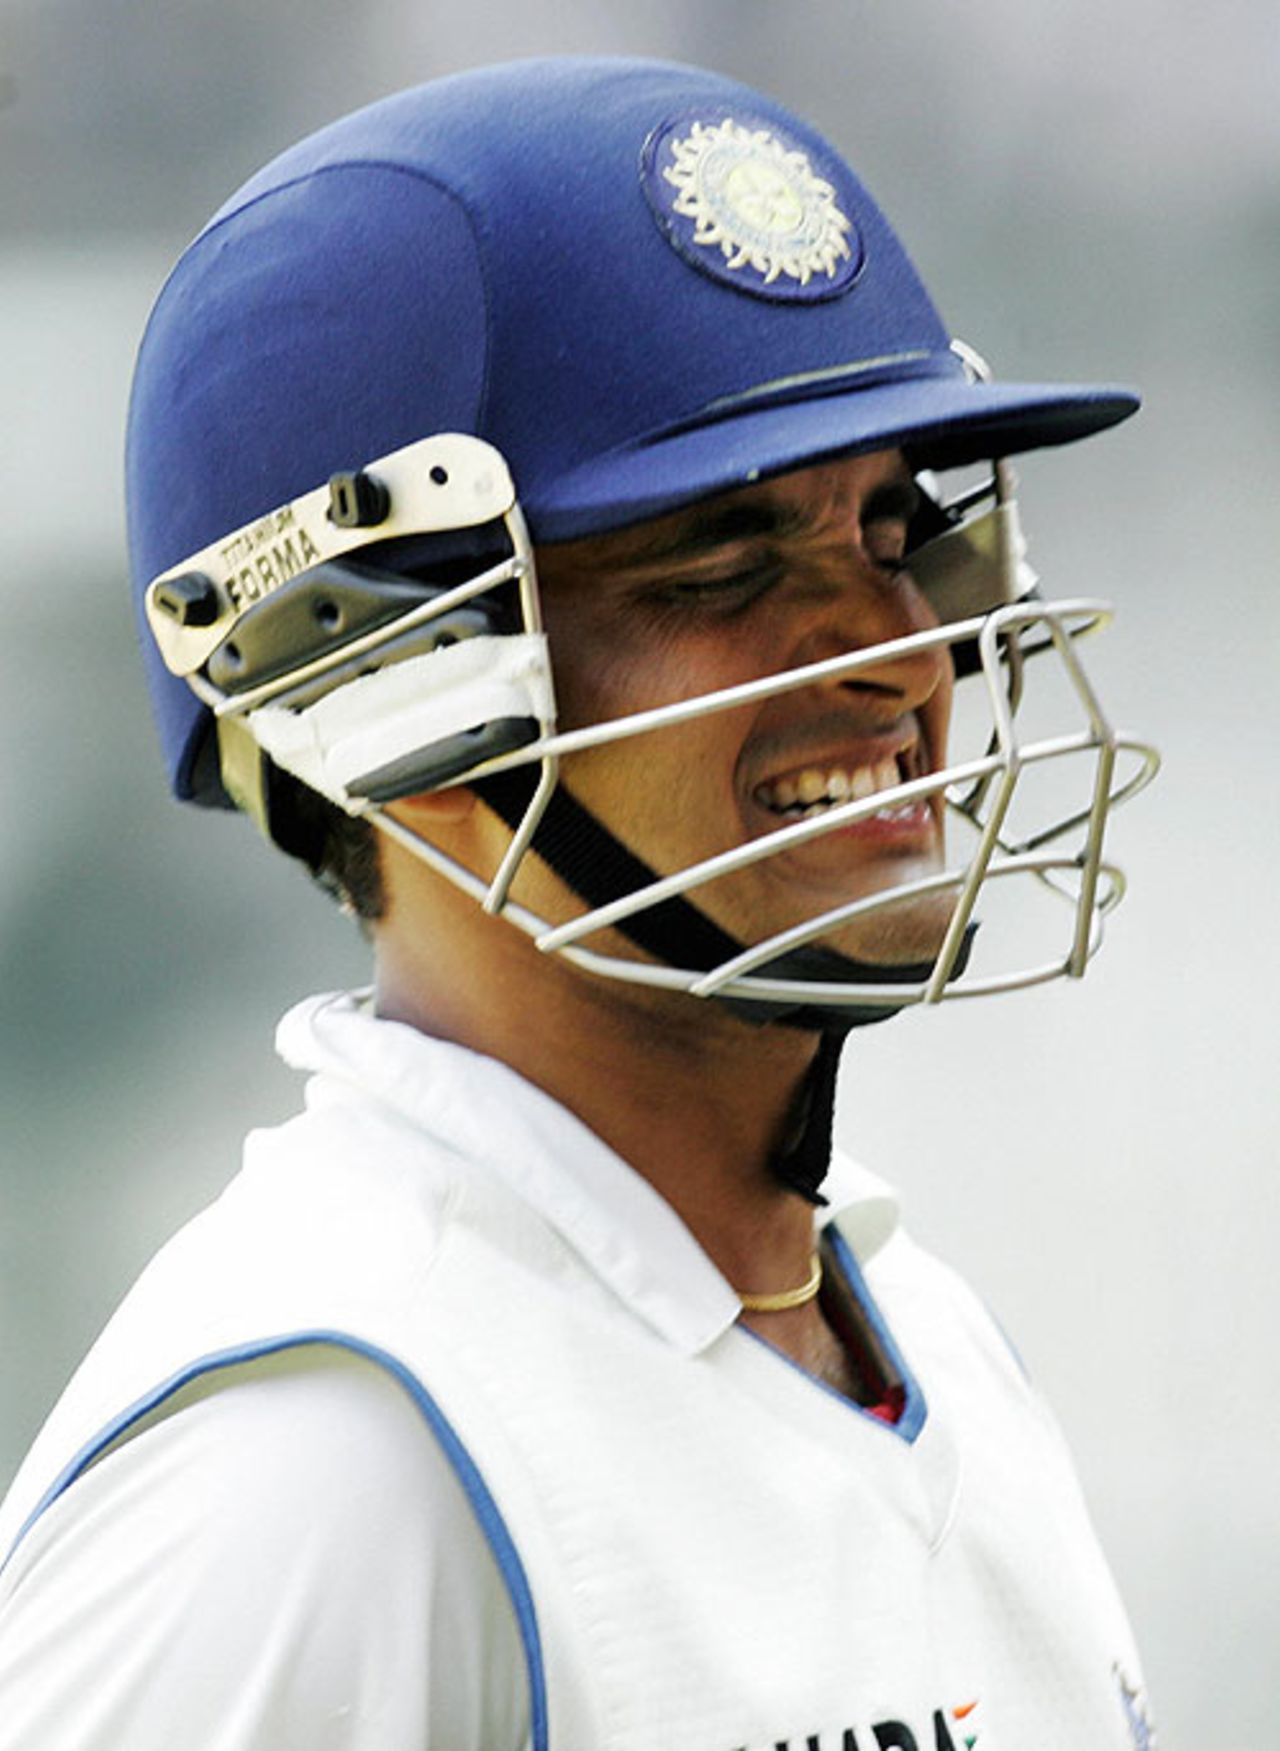 Sourav Ganguly fell nine short of a second ton in the match, India v Pakistan, 3rd Test, Bangalore, 5th day, December 12, 2007 

